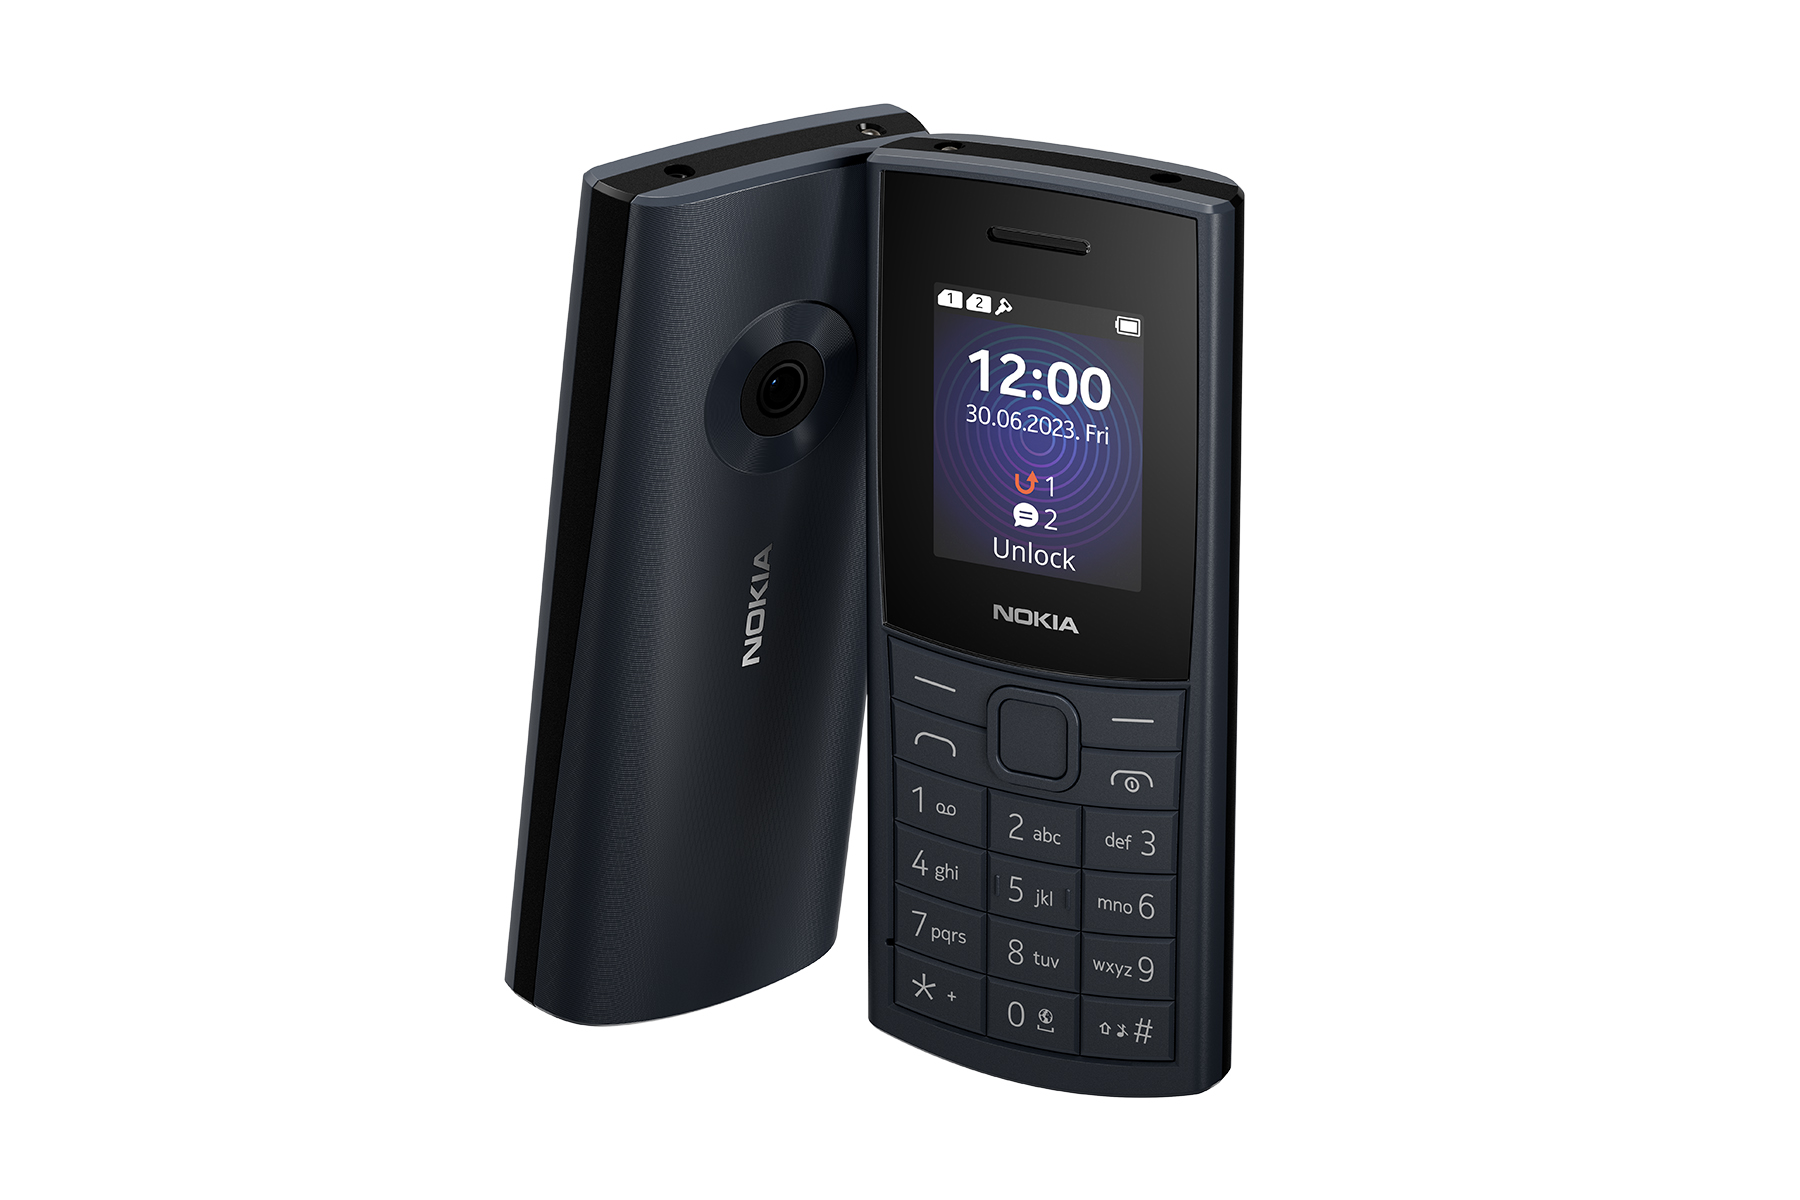 illustrative image of the Nokia 110 4G feature phone dumb phone from the rear and the front